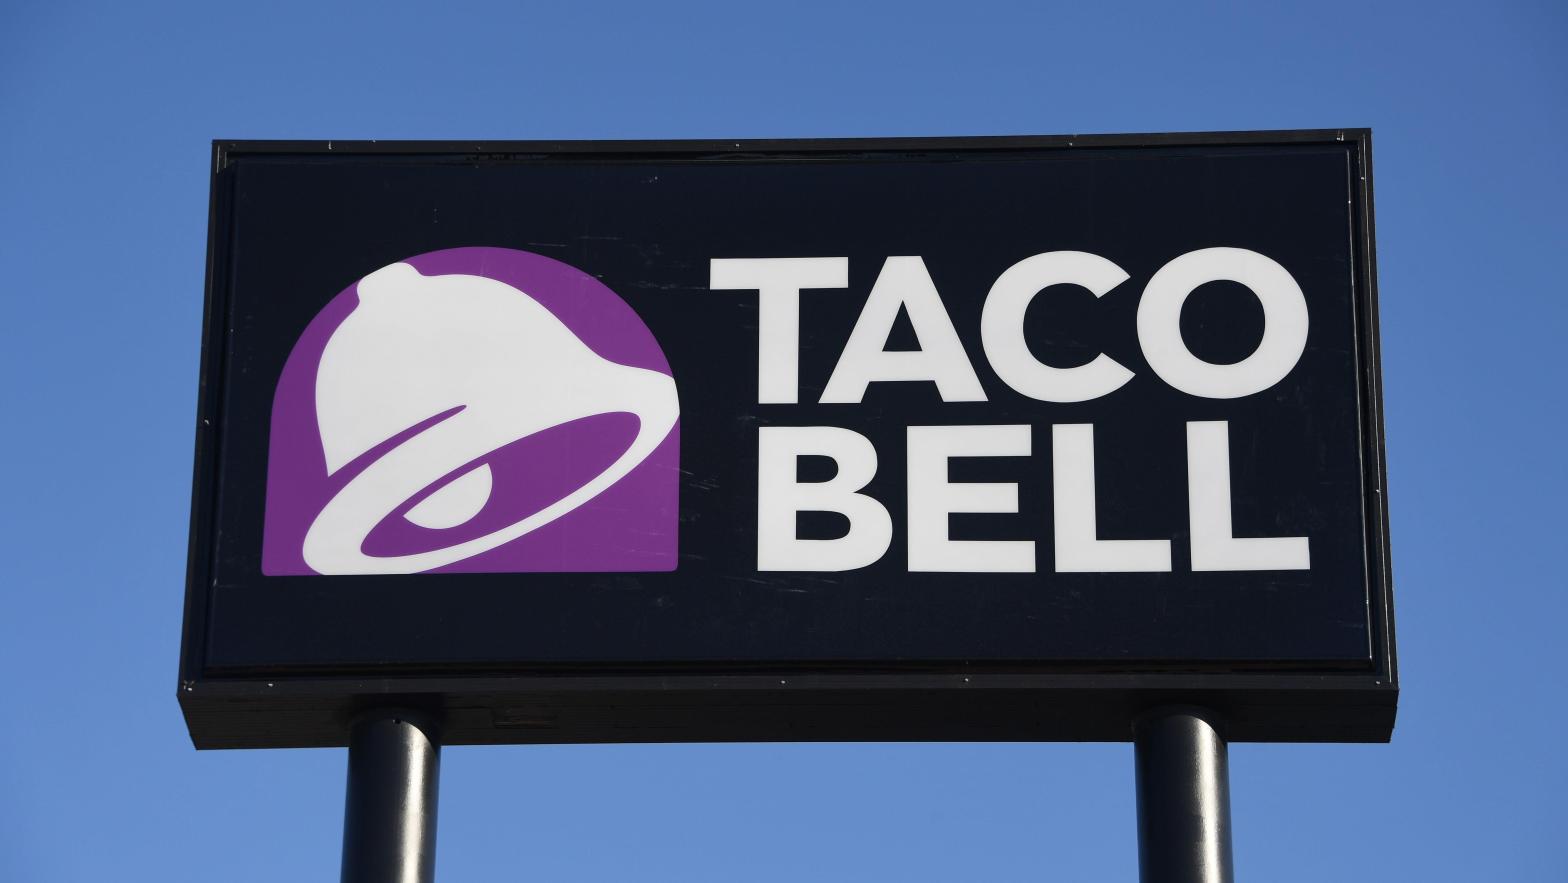 Taco Bell Defy is the company's attempt at reducing drive-thru times. (Photo: Ethan Miller, Getty Images)